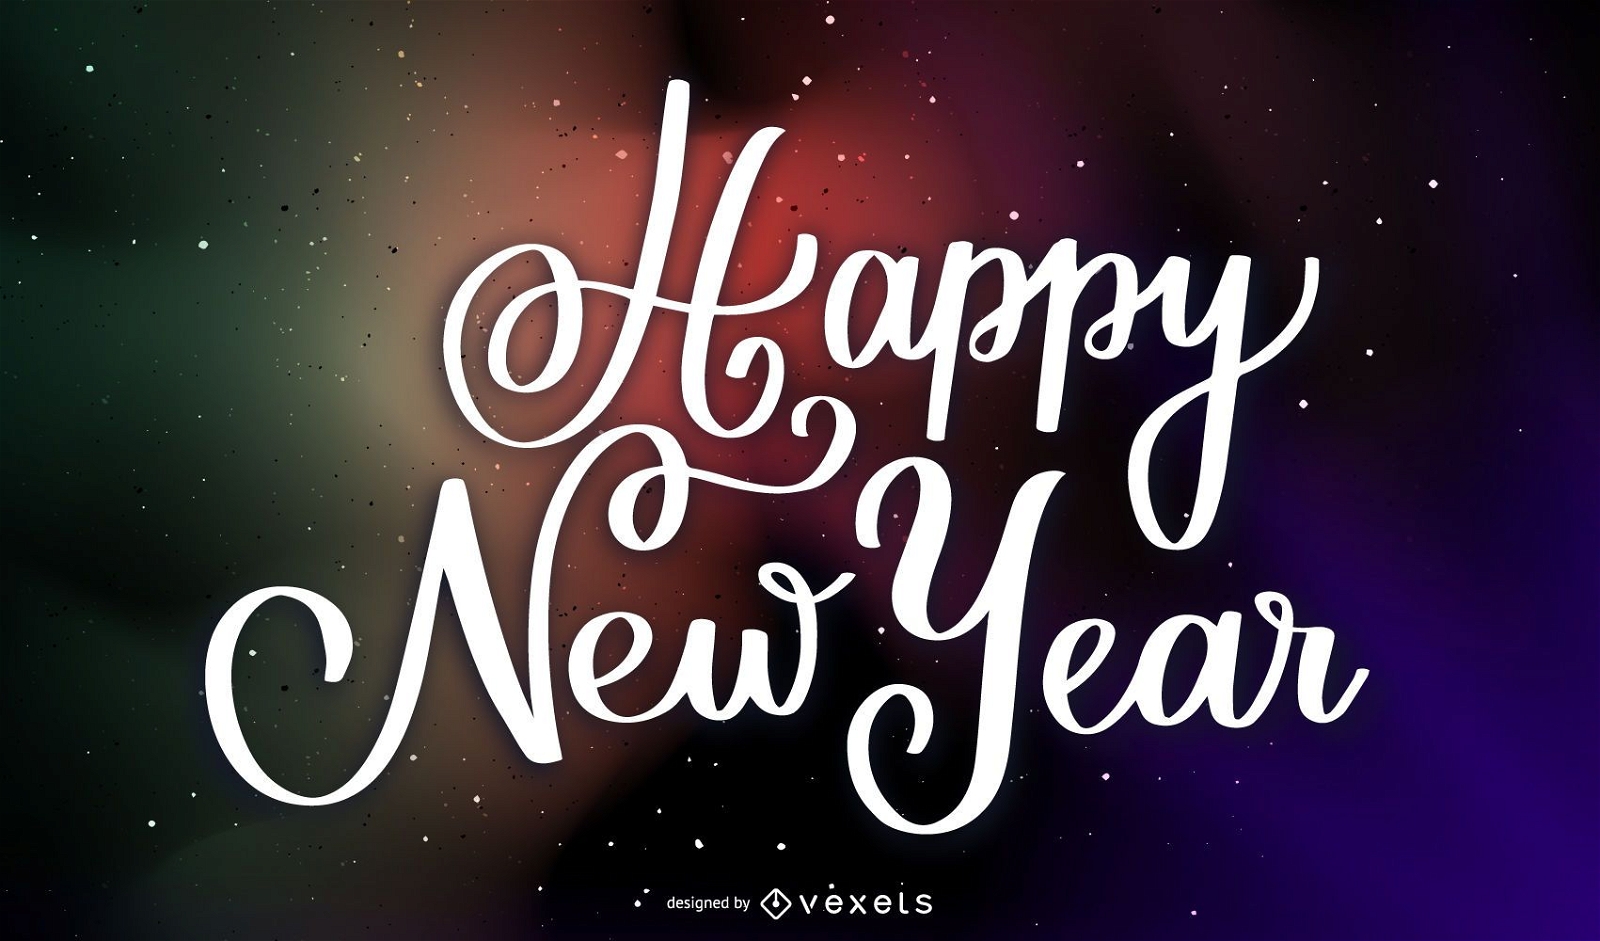 Stunning 2020 New Year Lettering on Space